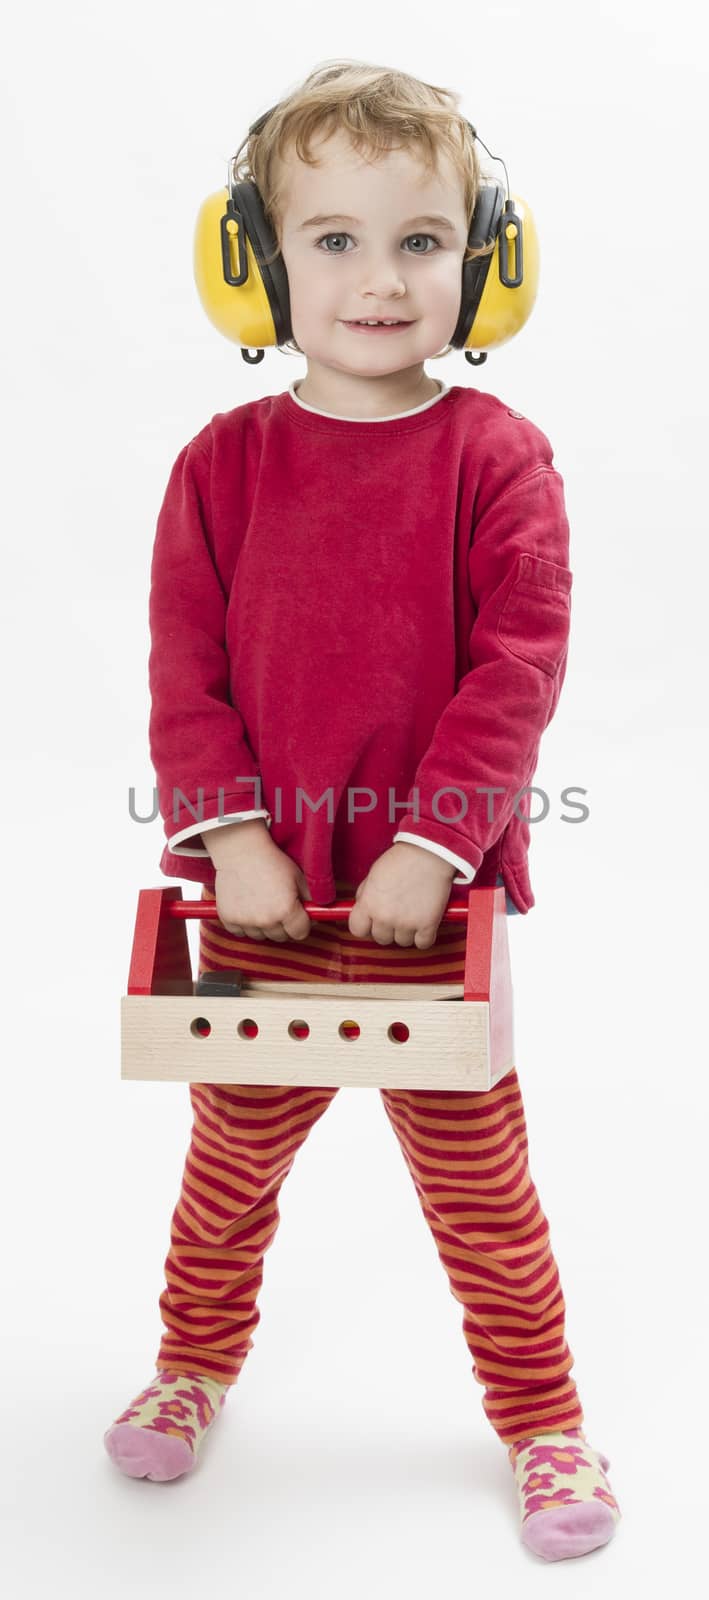 child in red clothing with toolbox and earmuffs. vertical image